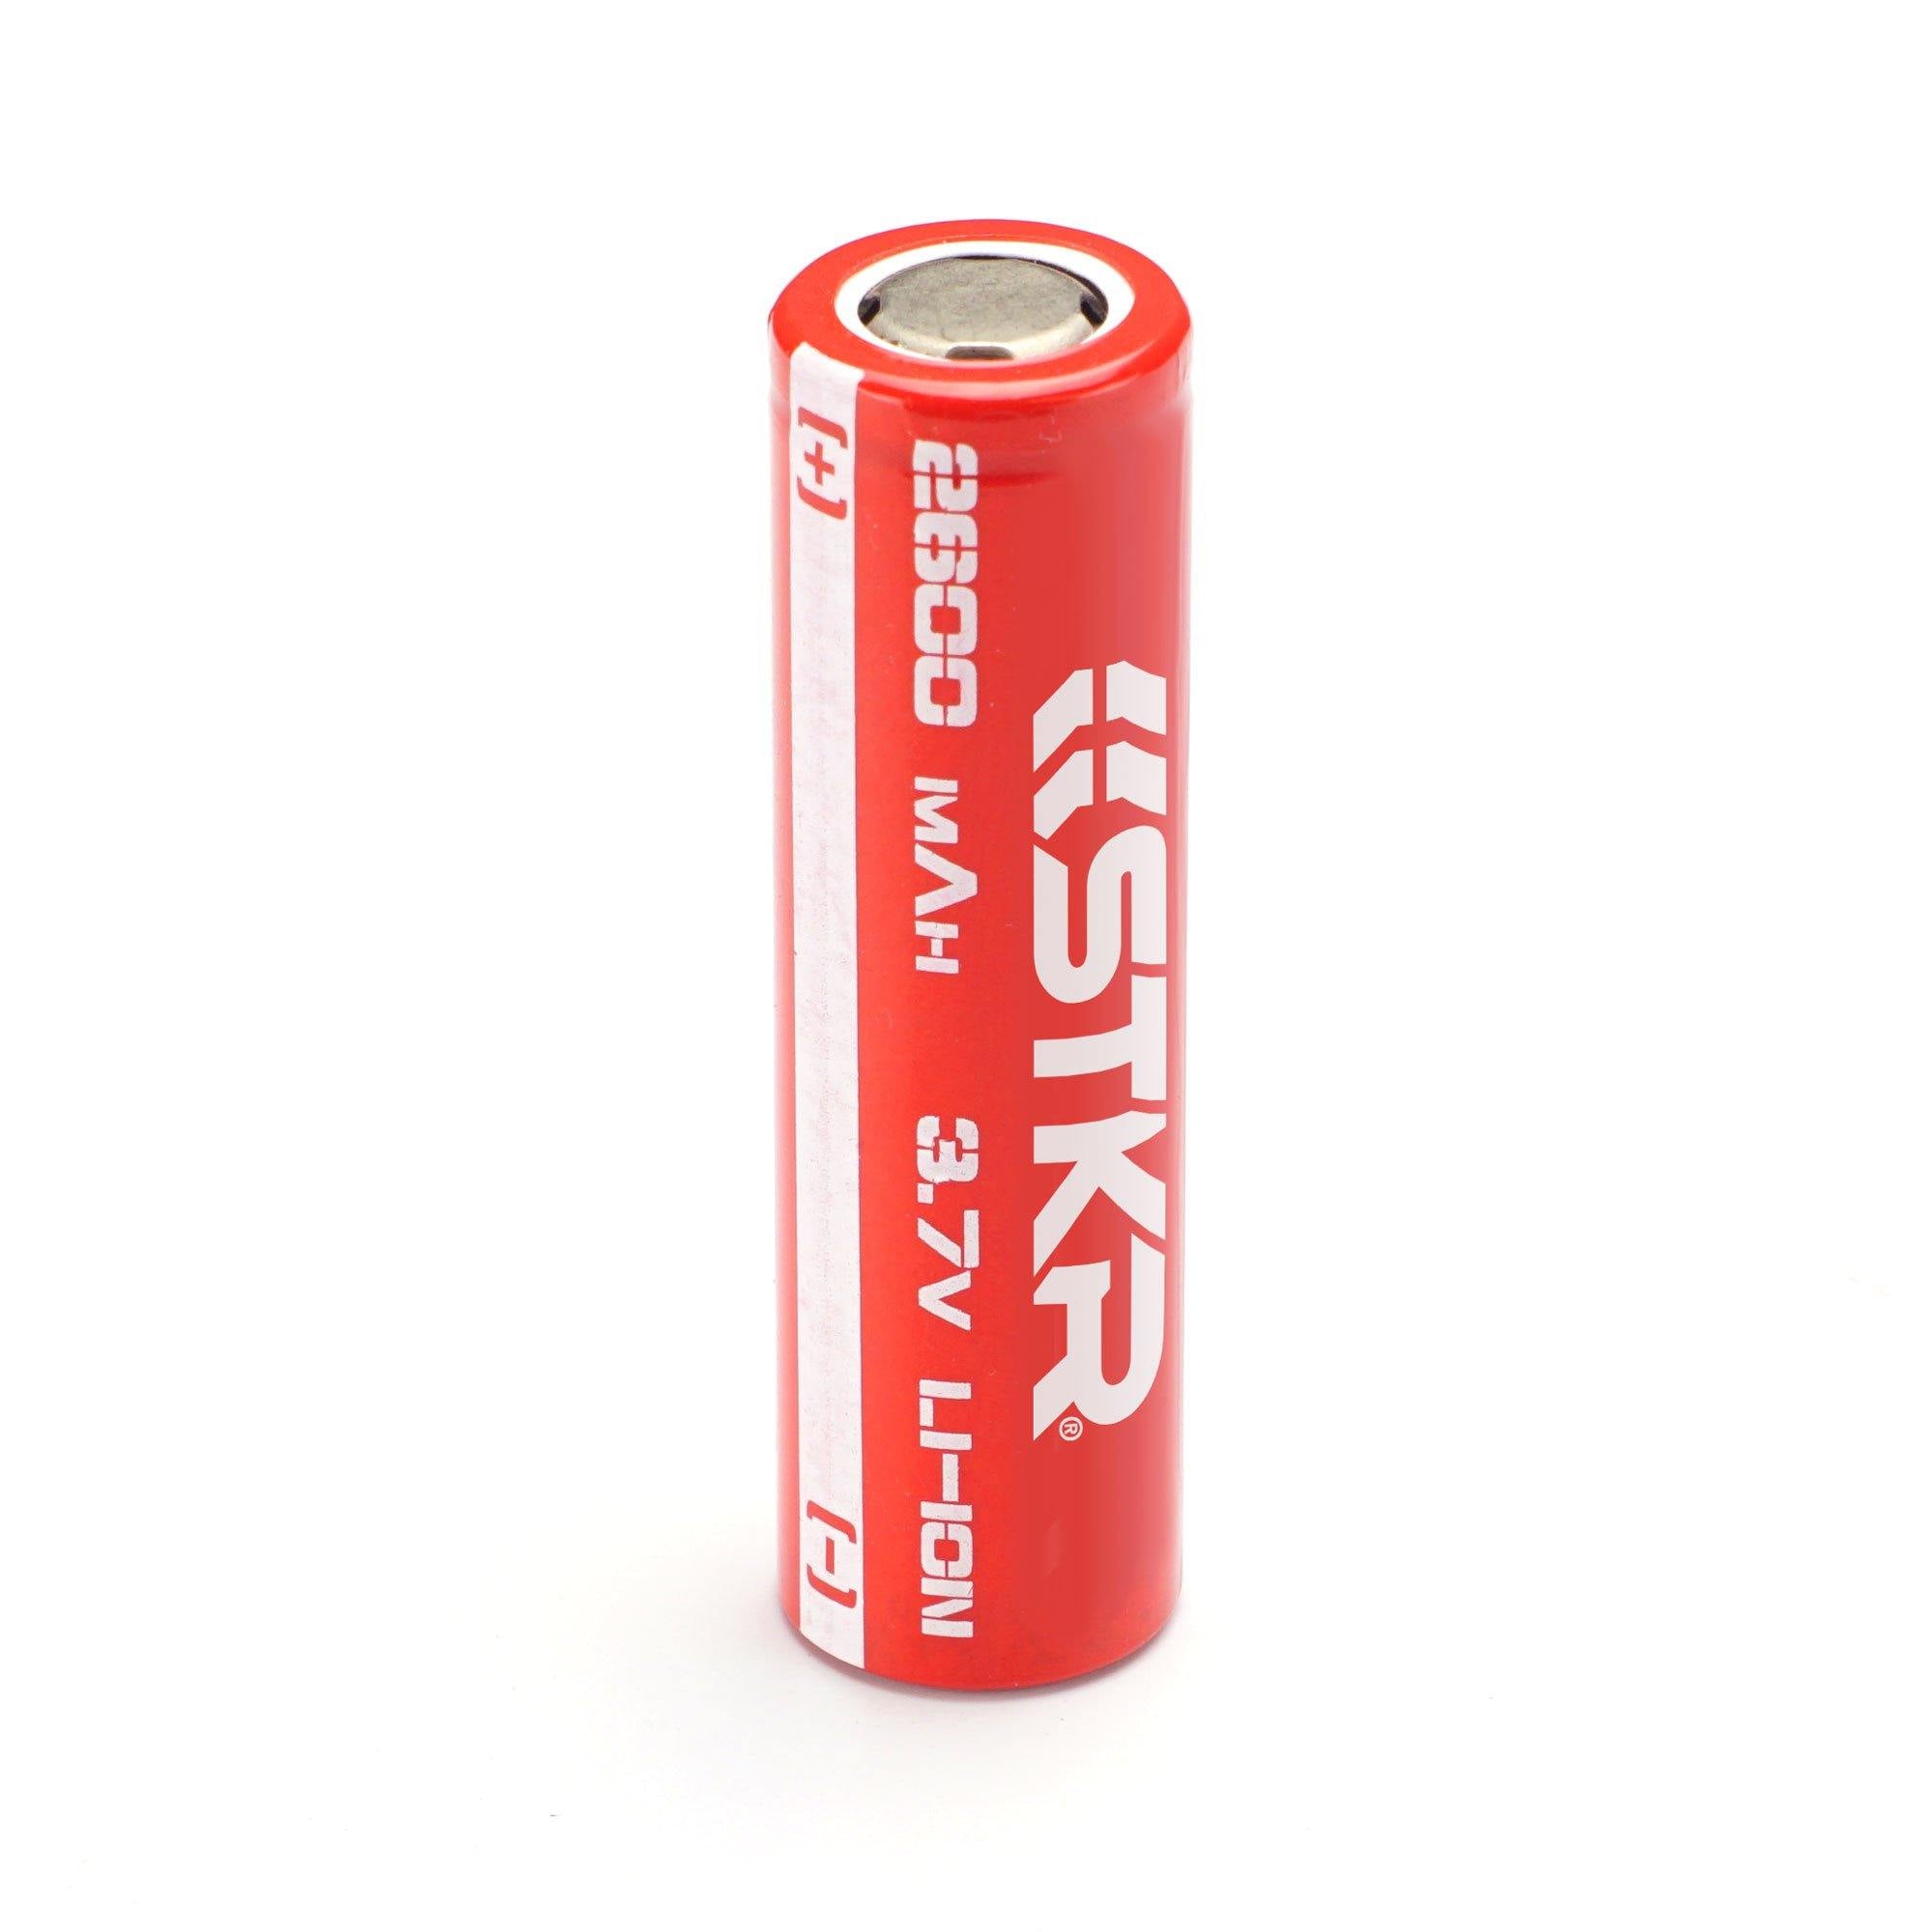 18650 Li-ion 2000mAh Rechargeable Battery Copy at Rs 55